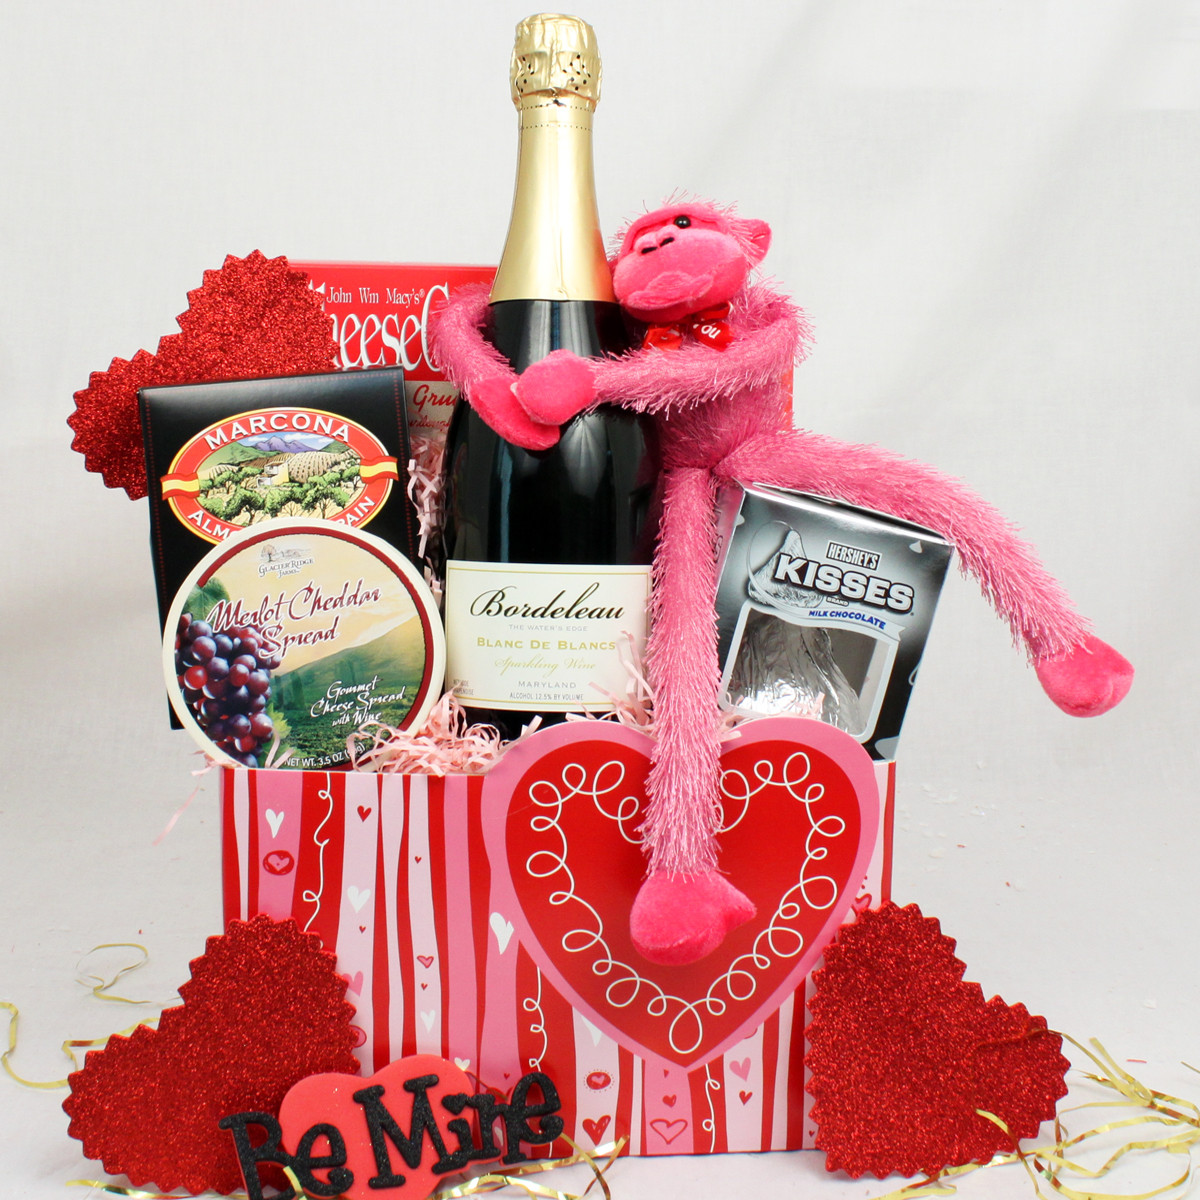 Valentines Day Gifts For Her Ideas
 Creative and Thoughtful Valentine’s Day Gifts for Her